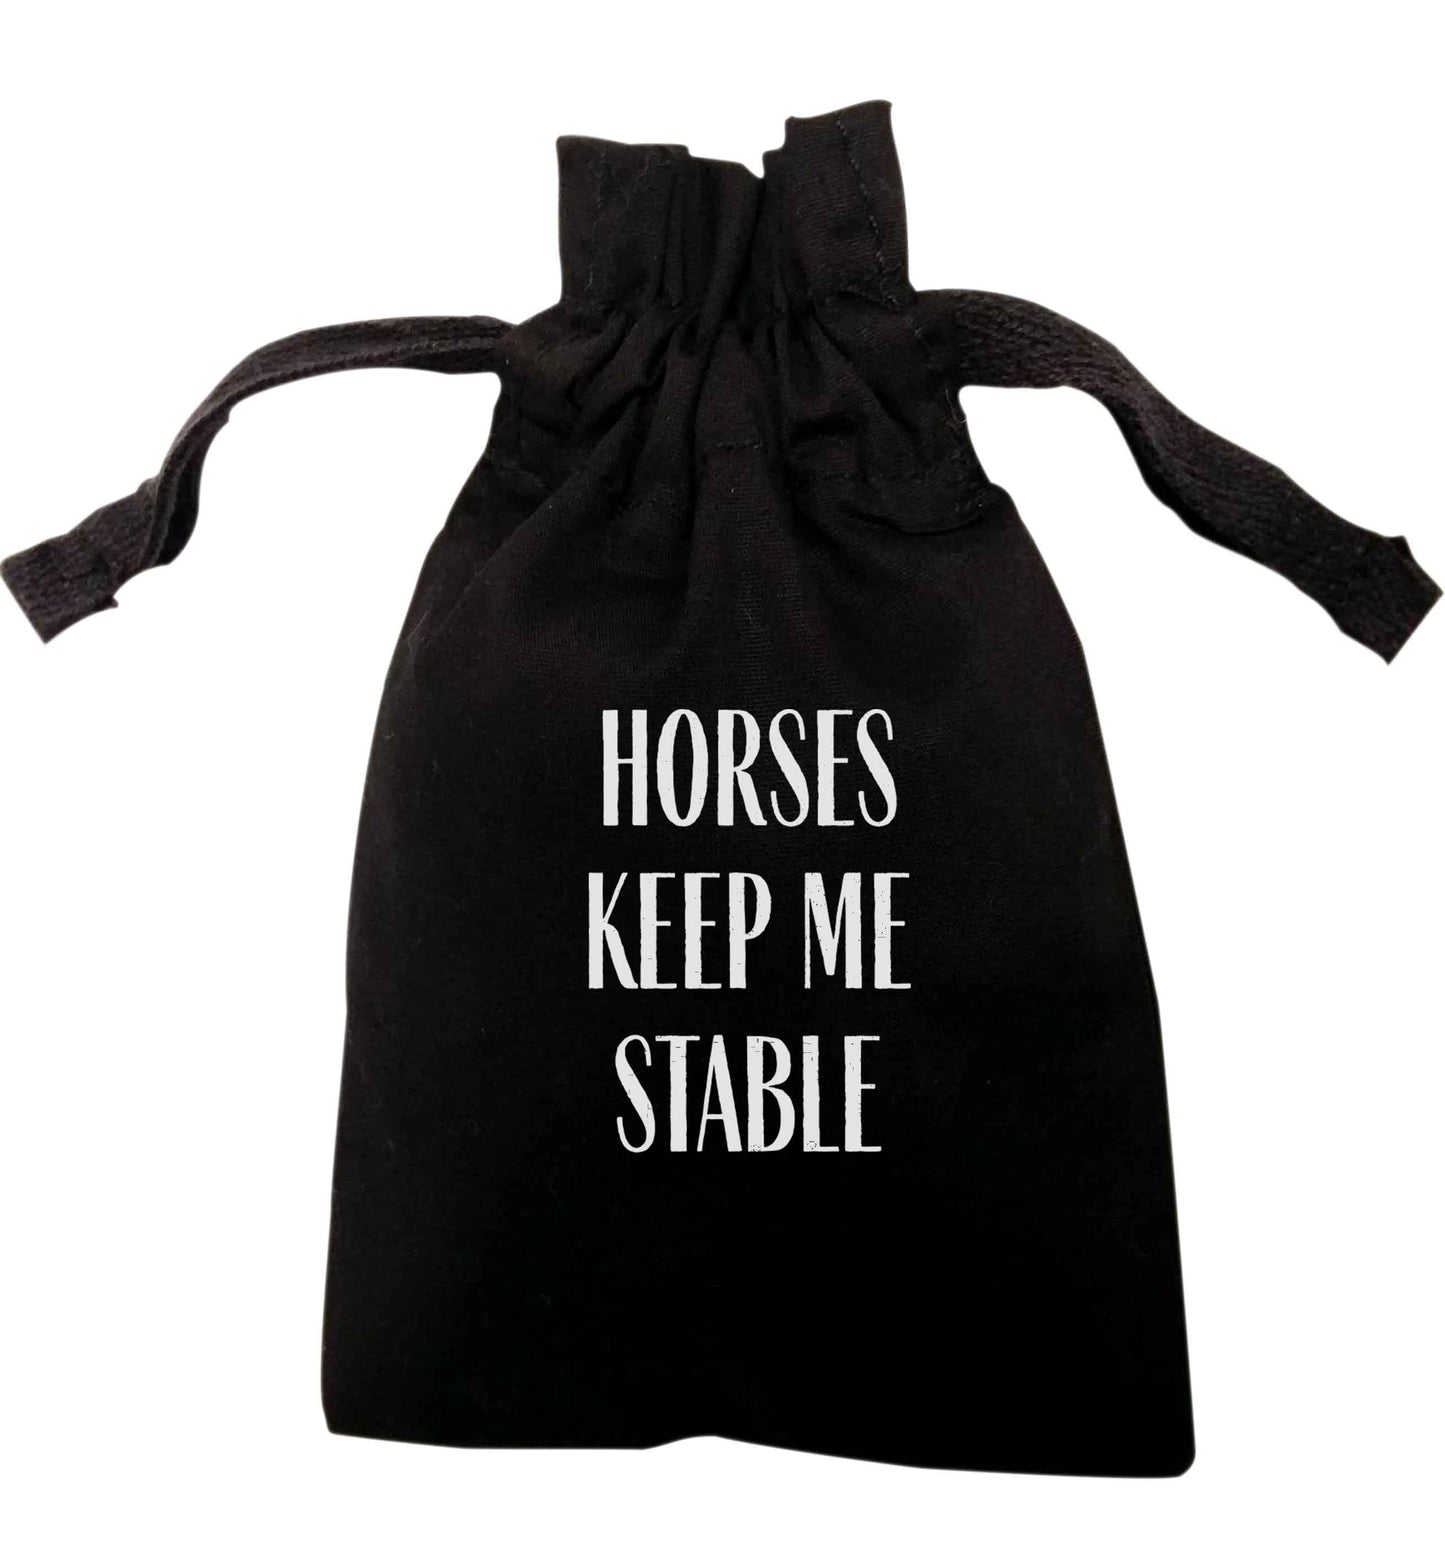 Horses keep me stable | XS - L | Pouch / Drawstring bag / Sack | Organic Cotton | Bulk discounts available!